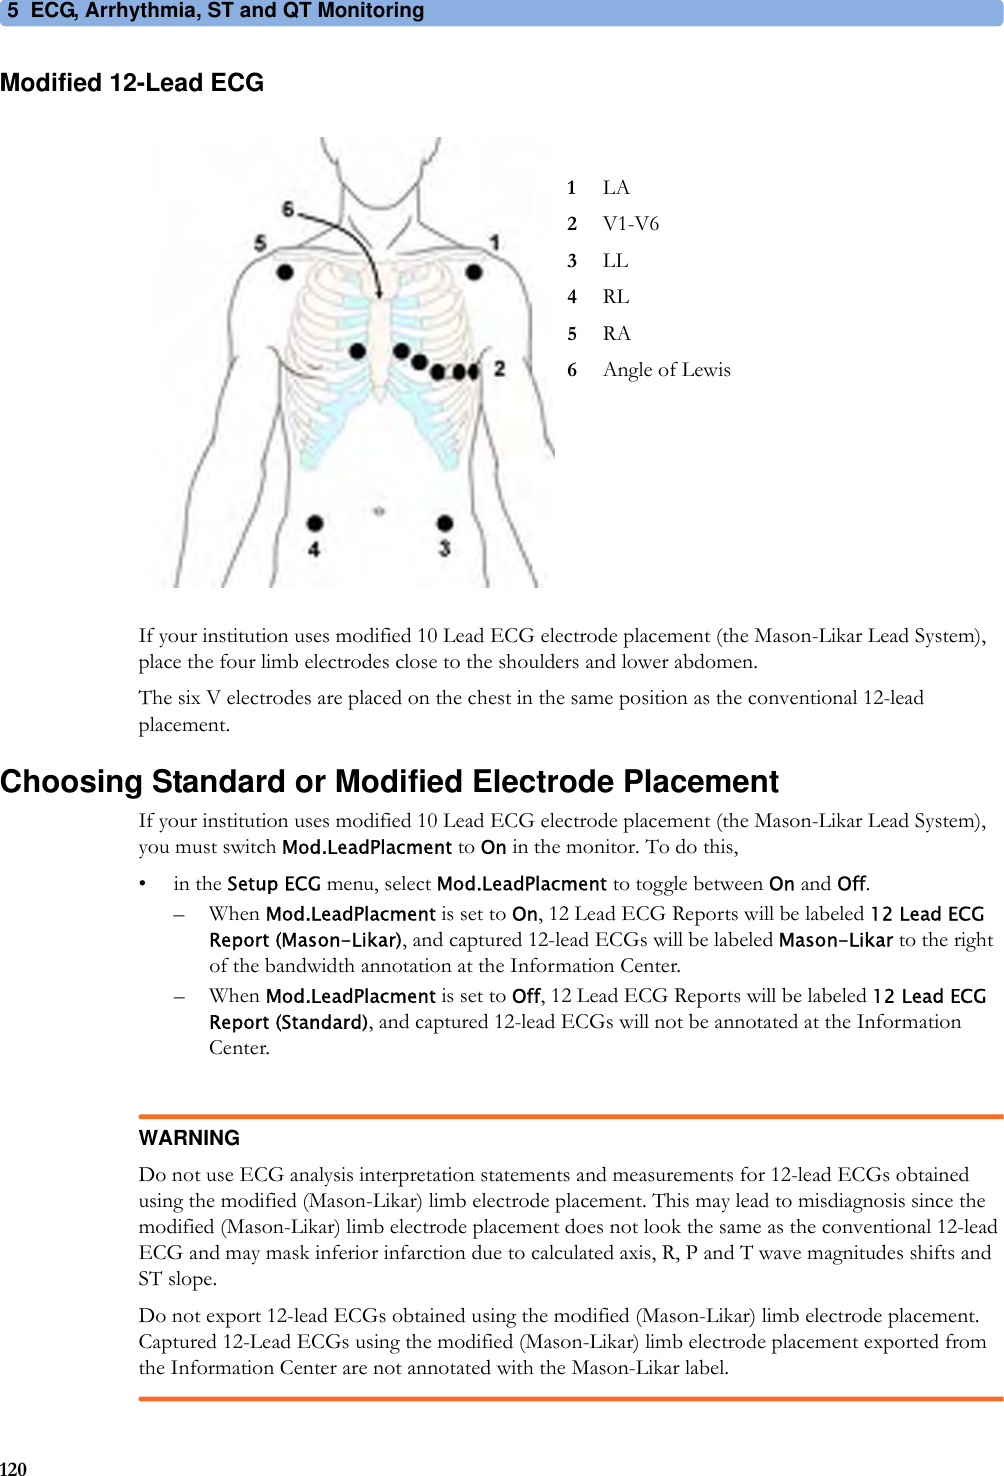 5 ECG, Arrhythmia, ST and QT Monitoring120Modified 12-Lead ECGIf your institution uses modified 10 Lead ECG electrode placement (the Mason-Likar Lead System), place the four limb electrodes close to the shoulders and lower abdomen.The six V electrodes are placed on the chest in the same position as the conventional 12-lead placement.Choosing Standard or Modified Electrode PlacementIf your institution uses modified 10 Lead ECG electrode placement (the Mason-Likar Lead System), you must switch Mod.LeadPlacment to On in the monitor. To do this,•in the Setup ECG menu, select Mod.LeadPlacment to toggle between On and Off.– When Mod.LeadPlacment is set to On, 12 Lead ECG Reports will be labeled 12 Lead ECG Report (Mason-Likar), and captured 12-lead ECGs will be labeled Mason-Likar to the right of the bandwidth annotation at the Information Center.– When Mod.LeadPlacment is set to Off, 12 Lead ECG Reports will be labeled 12 Lead ECG Report (Standard), and captured 12-lead ECGs will not be annotated at the Information Center.WARNINGDo not use ECG analysis interpretation statements and measurements for 12-lead ECGs obtained using the modified (Mason-Likar) limb electrode placement. This may lead to misdiagnosis since the modified (Mason-Likar) limb electrode placement does not look the same as the conventional 12-lead ECG and may mask inferior infarction due to calculated axis, R, P and T wave magnitudes shifts and ST slope.Do not export 12-lead ECGs obtained using the modified (Mason-Likar) limb electrode placement. Captured 12-Lead ECGs using the modified (Mason-Likar) limb electrode placement exported from the Information Center are not annotated with the Mason-Likar label.1LA2V1-V63LL4RL5RA6Angle of Lewis